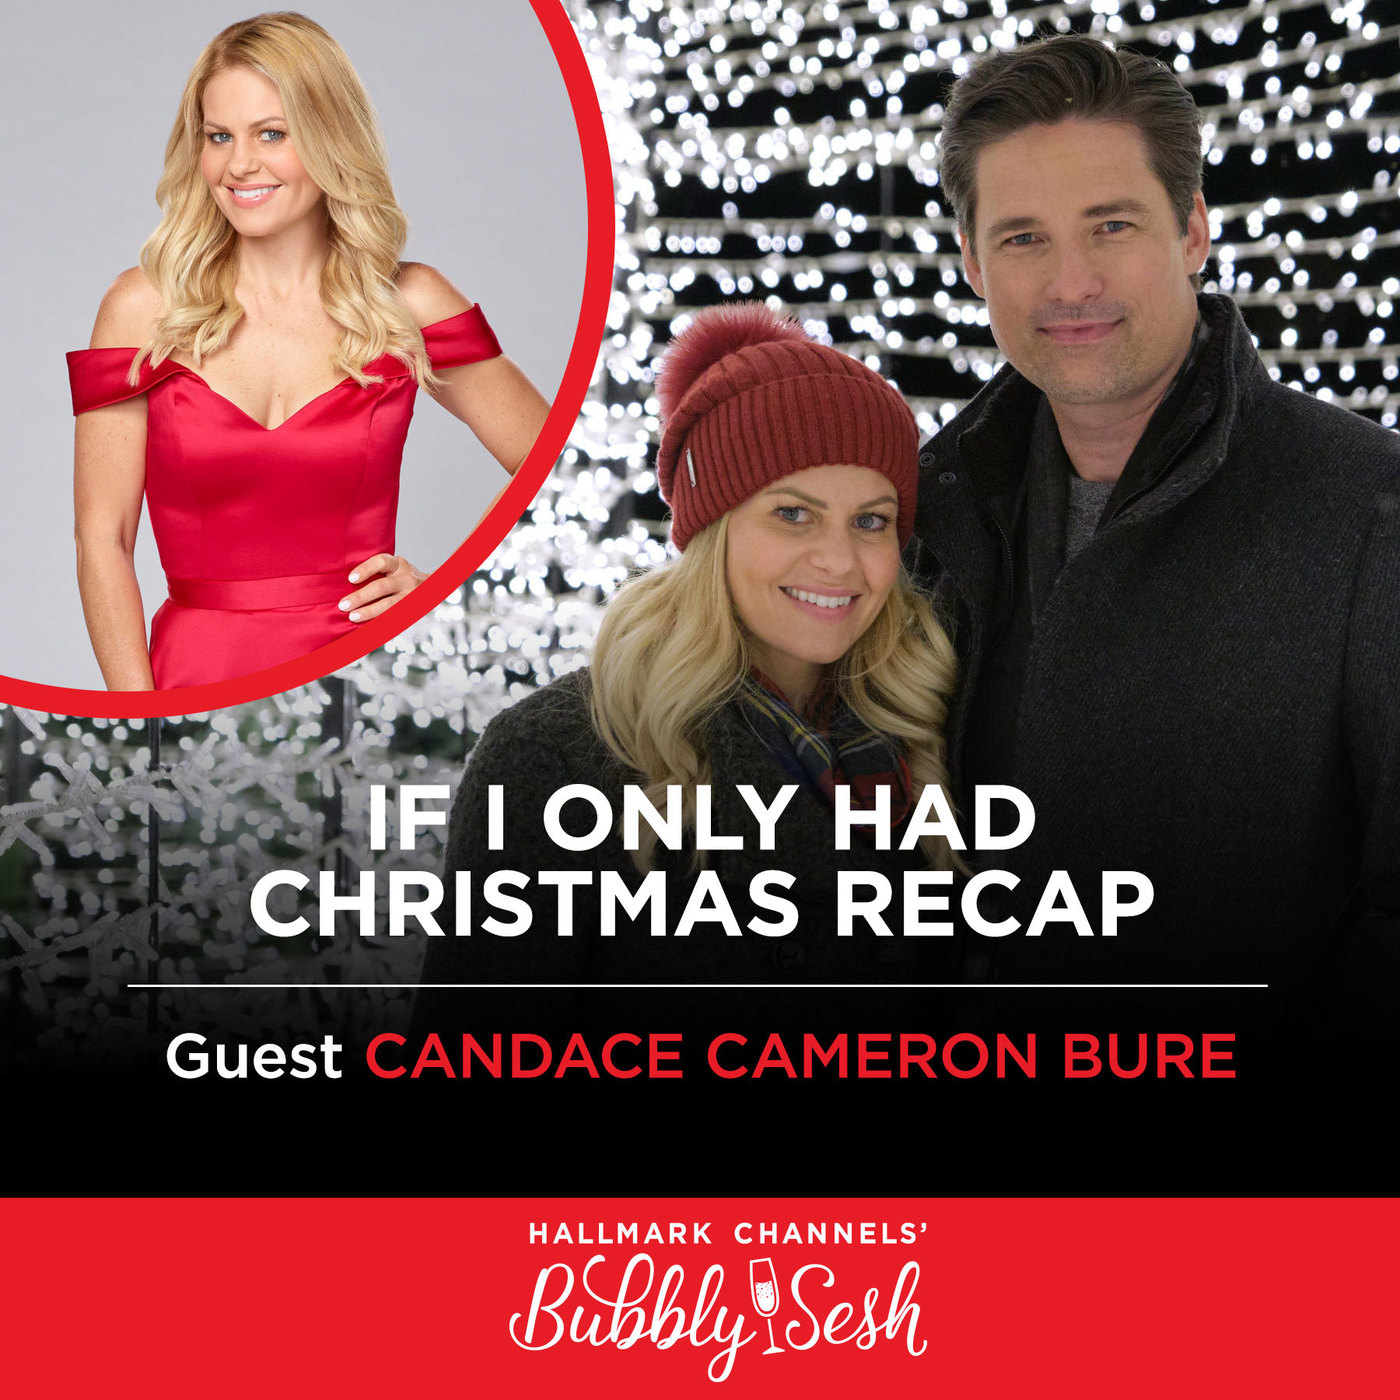  If I Only Had Christmas Recap with Guest Candace Cameron Bure 